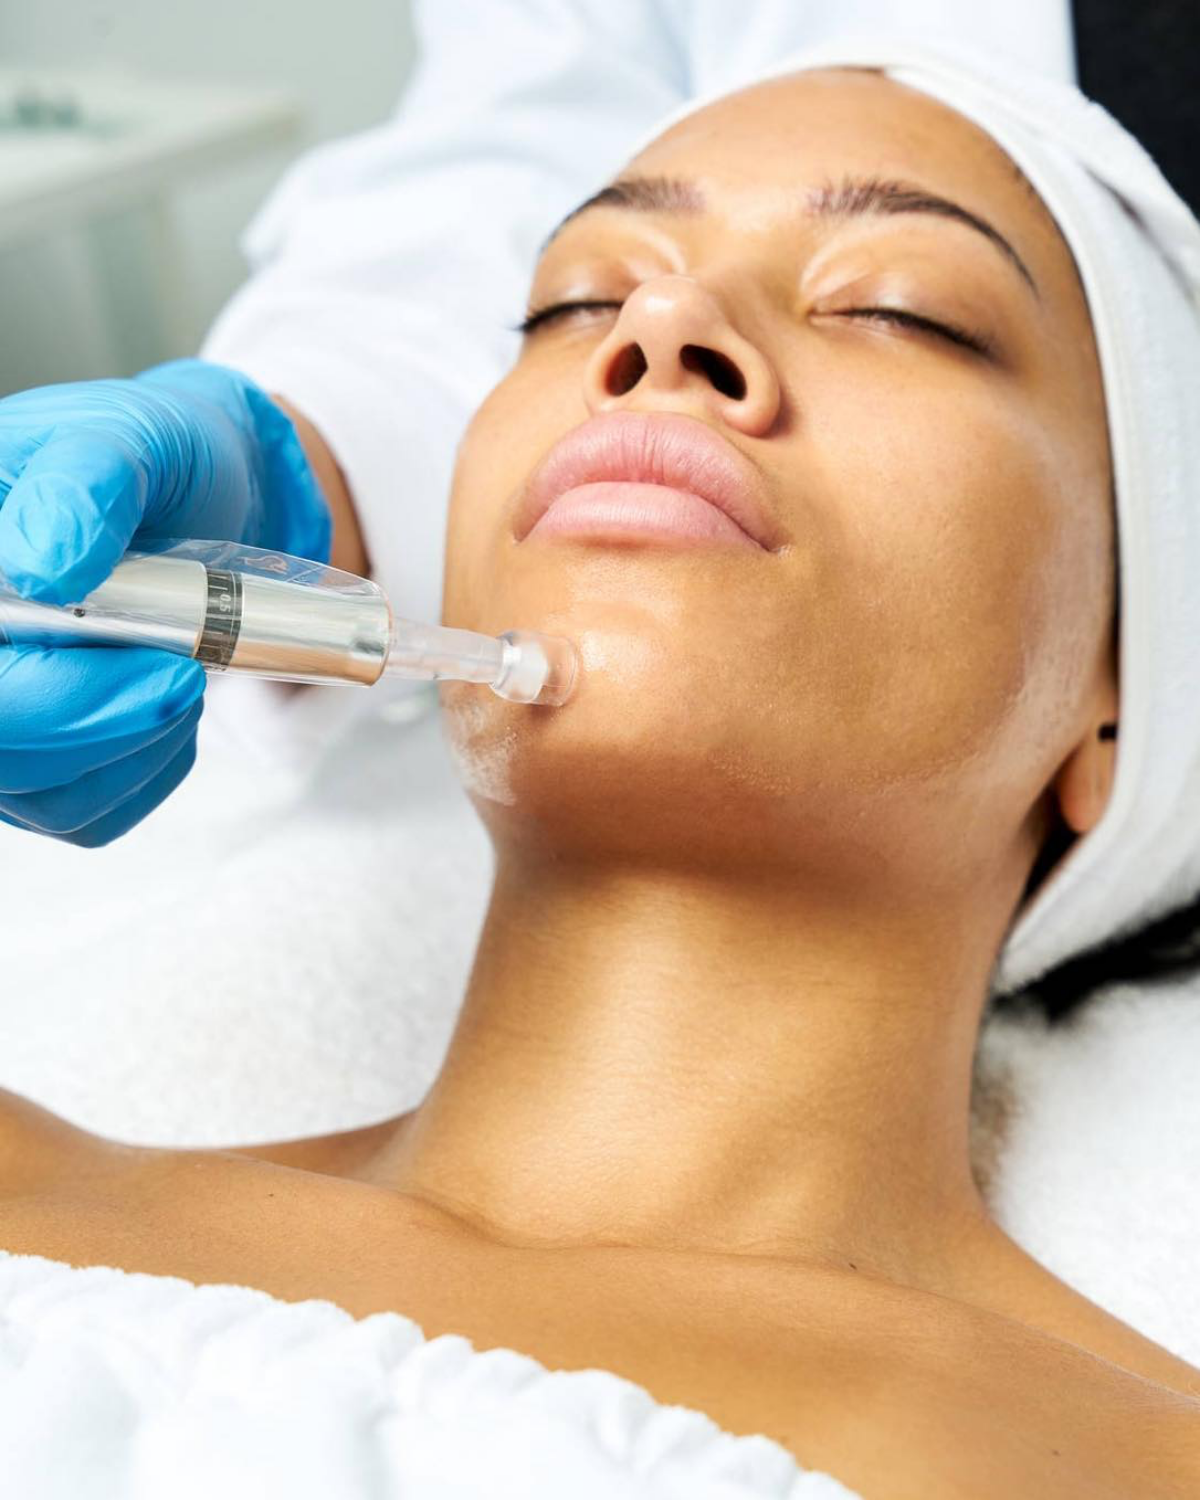 Microneedling Before And After: The Best Decision I’ve Made For My Skin